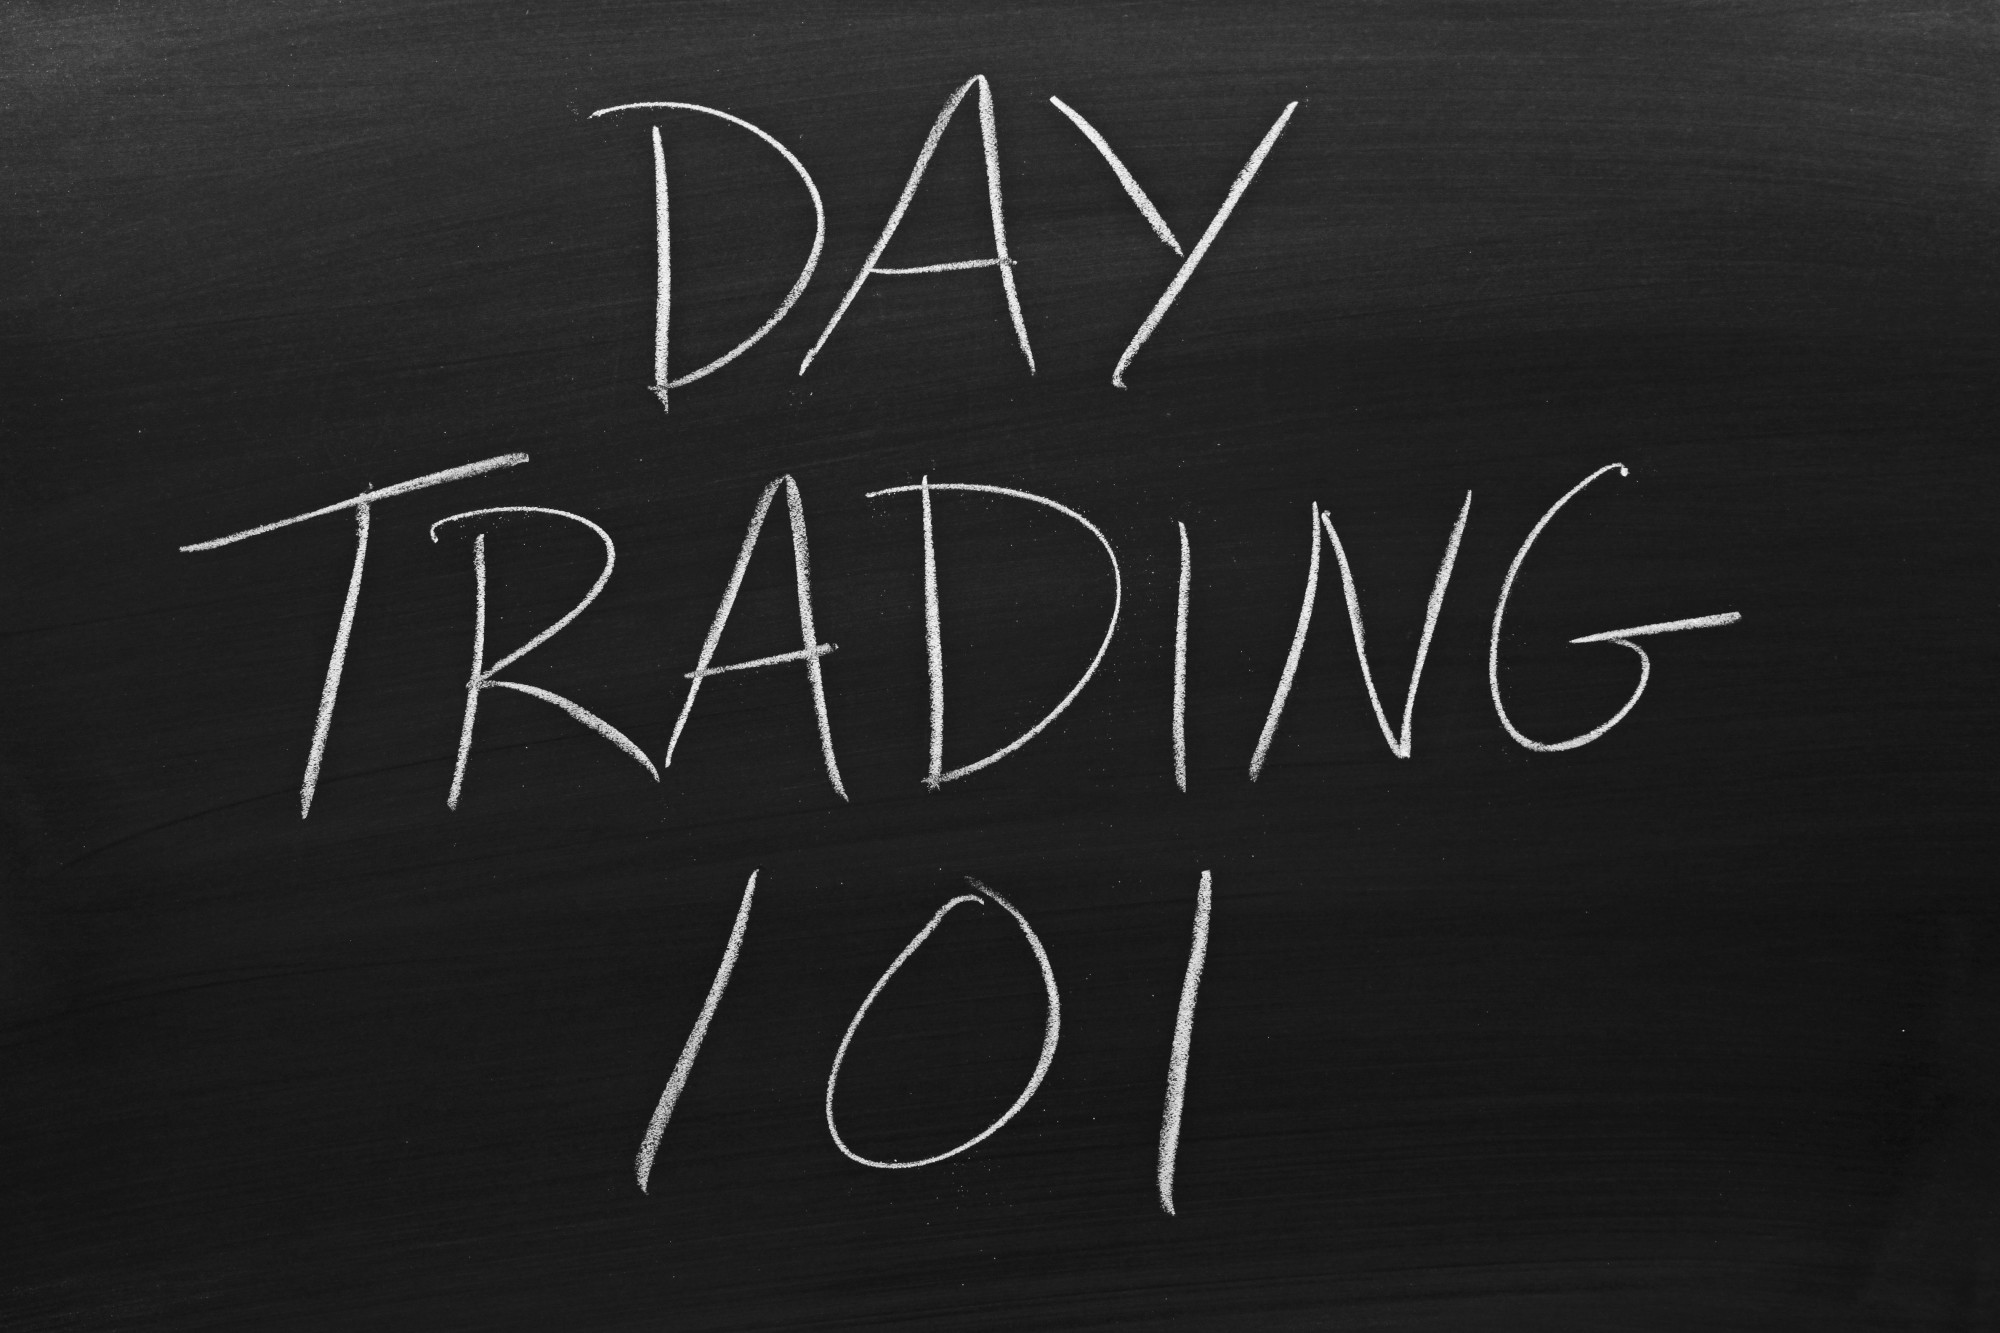 Day trading stocks is one strategy for making money in the stock market, but success doesn't come on a silver platter. Use these tips to get ahead.